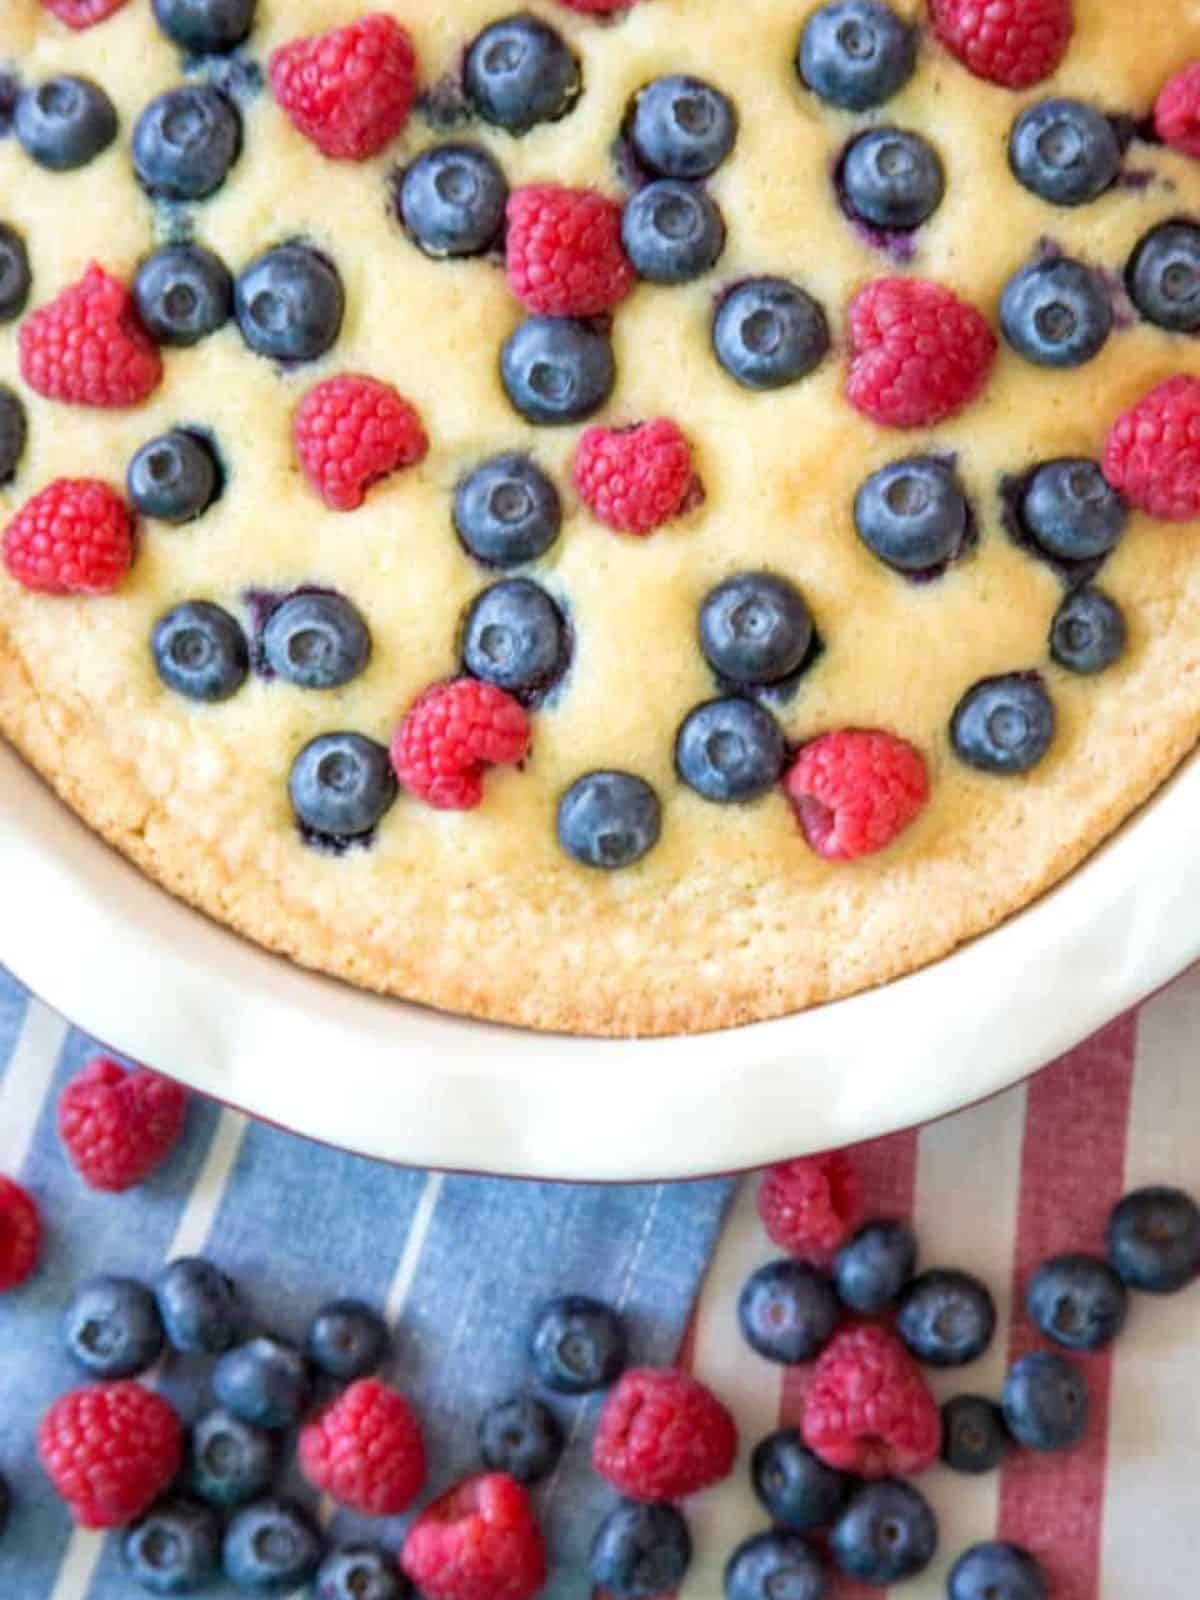 delicious gluten-free berry buttermilk cake topped with fresh berries.